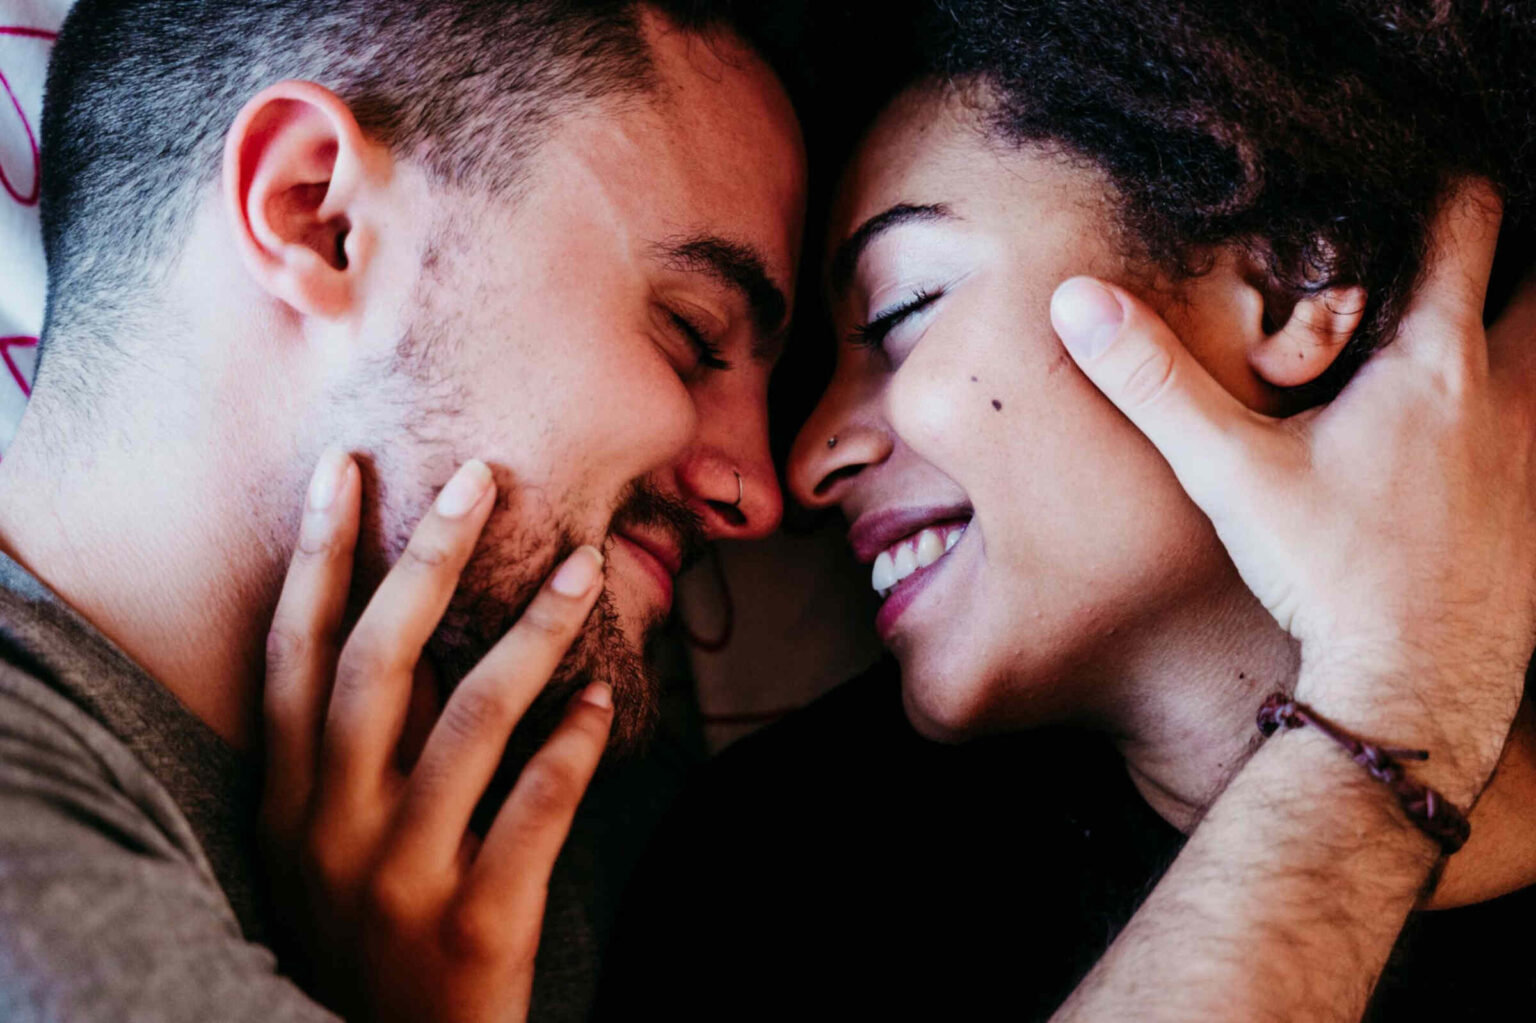 From using contraceptives to practicing self-care, learn more about how sexual health helps reduce stress in relationships and in the bedroom.